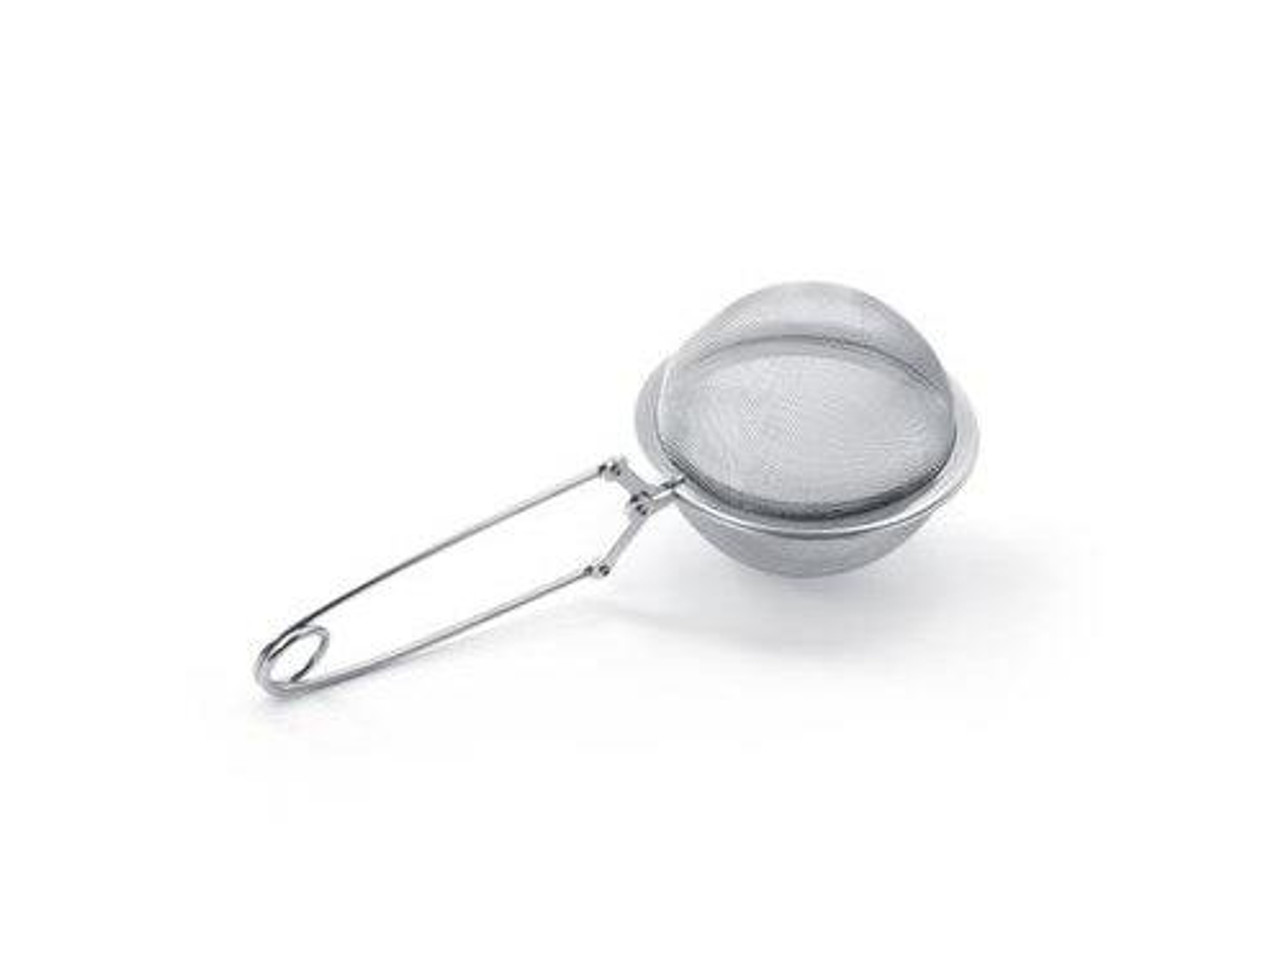 https://cdn11.bigcommerce.com/s-1nr8hwfbkq/images/stencil/1280x1280/products/1672/5179/cha-cult-tea-ball-tongs-size-l-6.5cm-stainless-steel__68427.1617073637.jpg?c=2